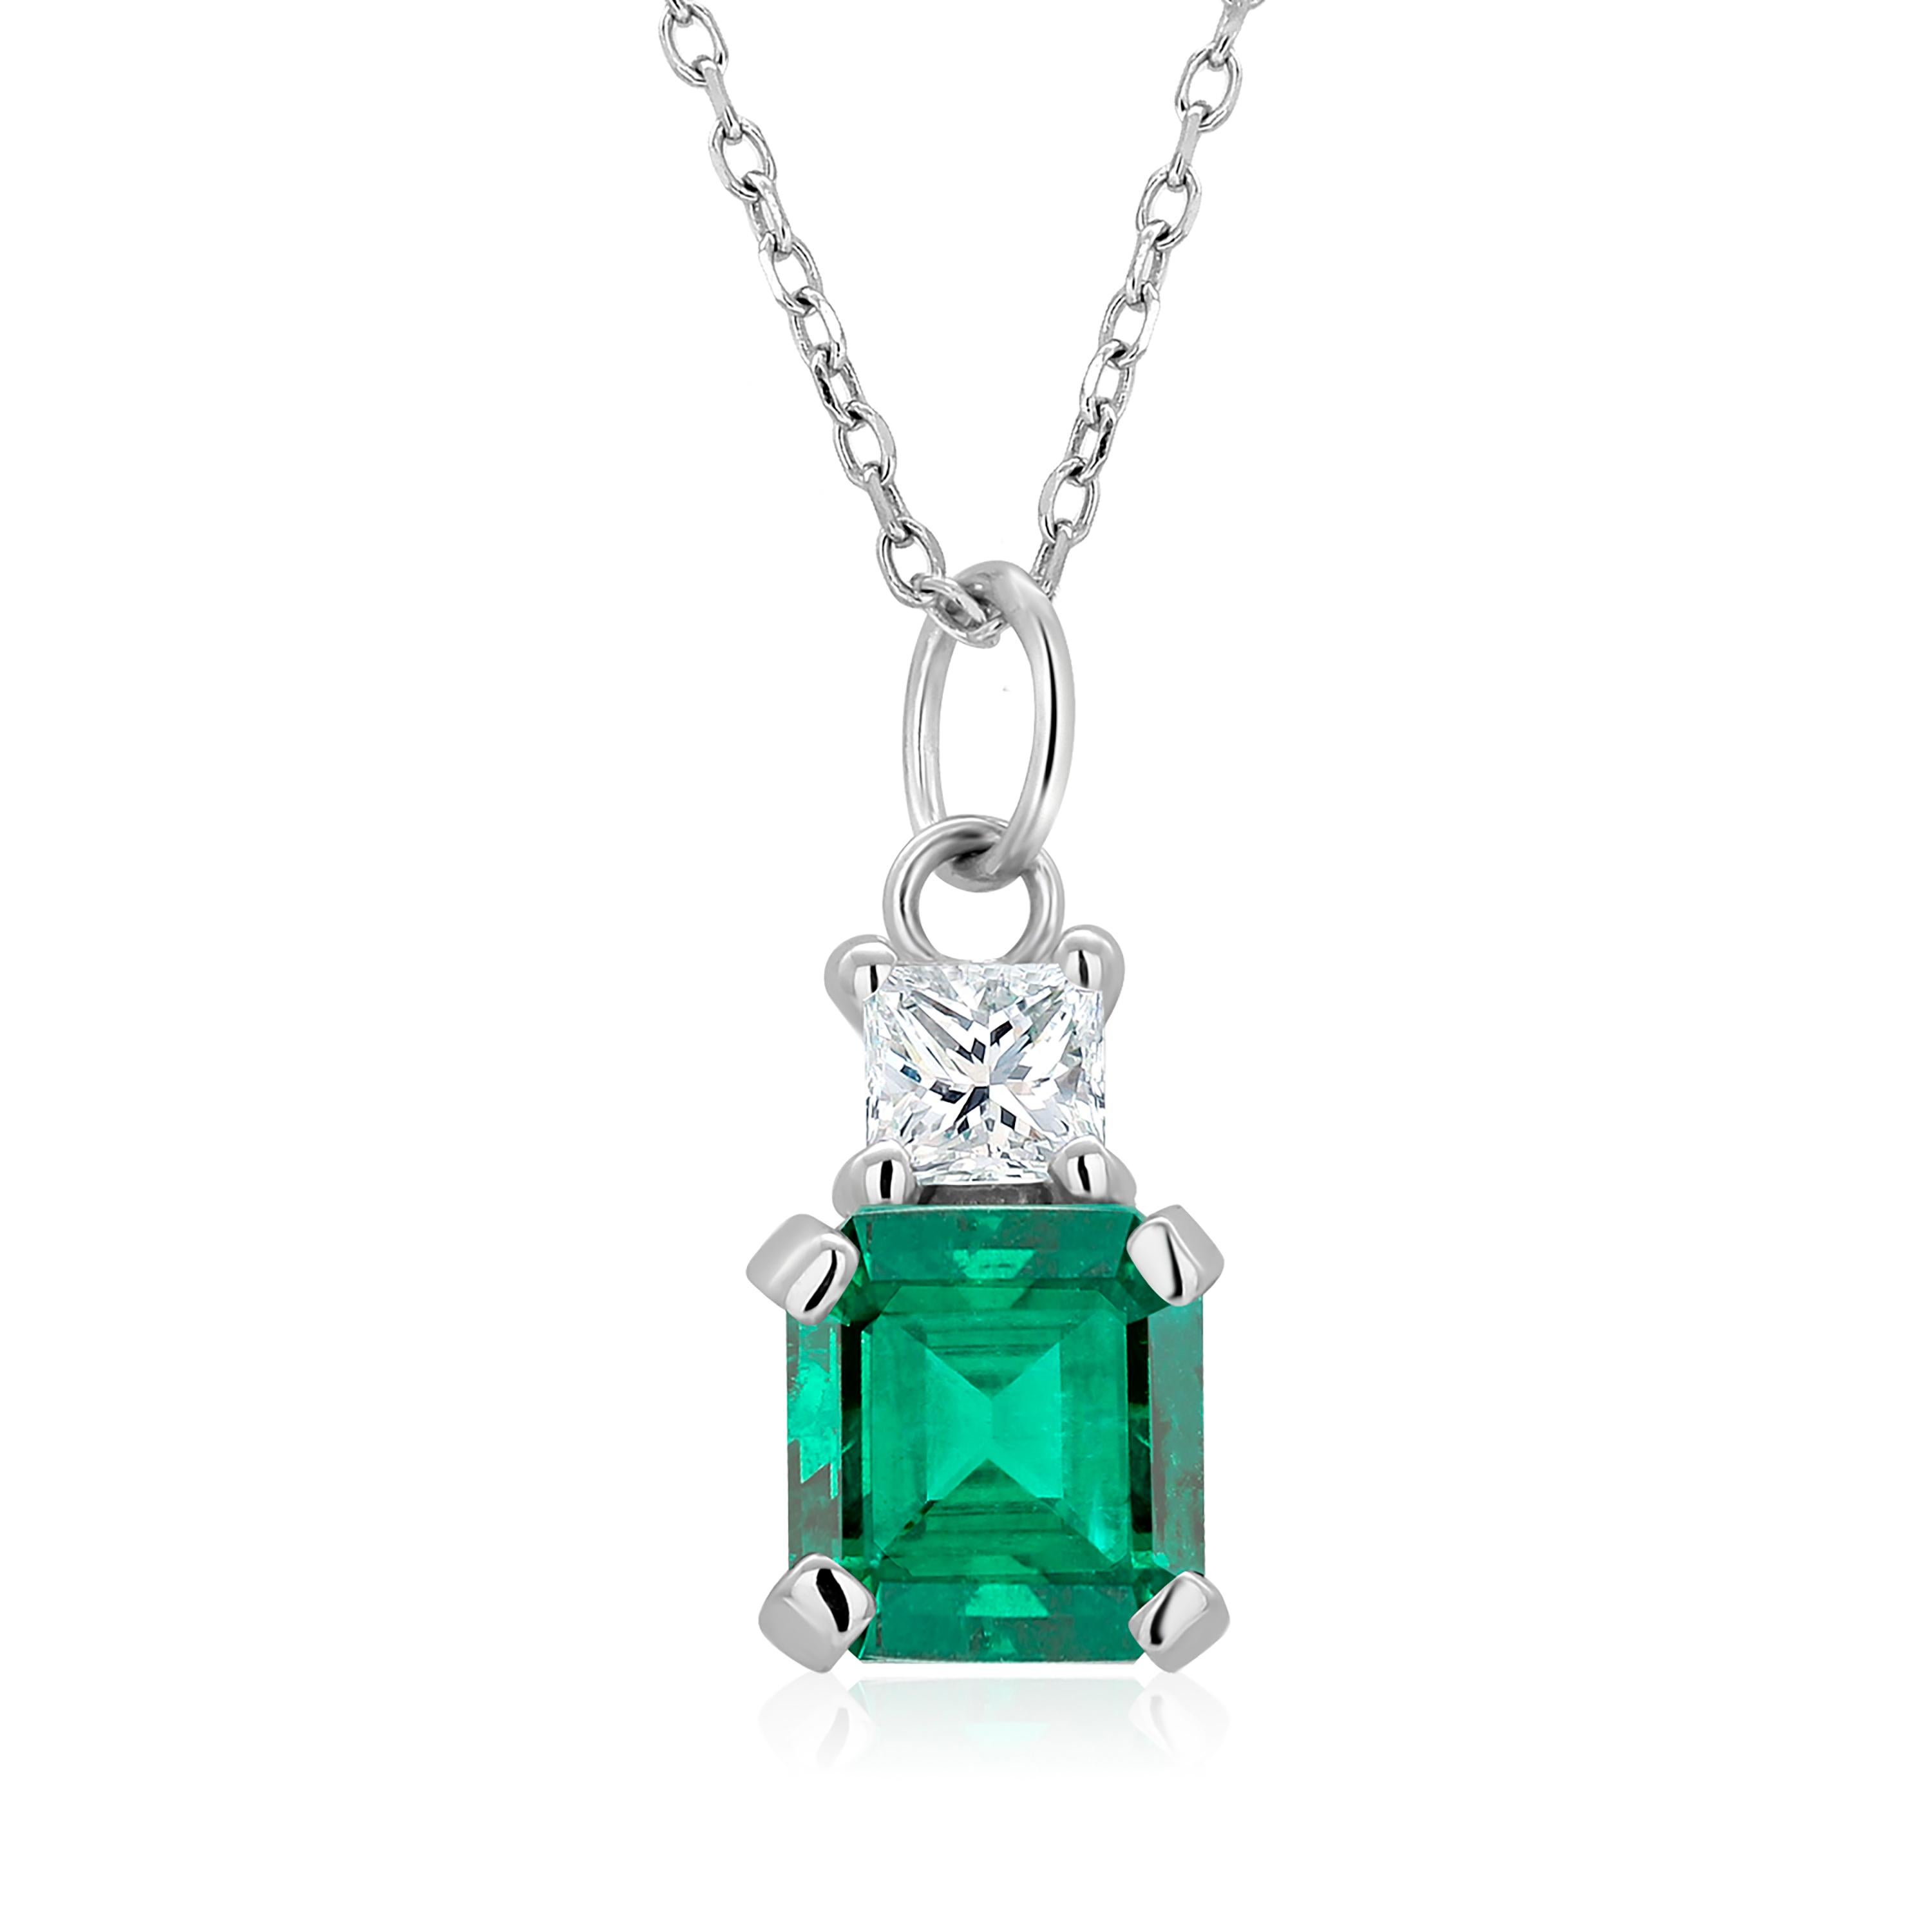 14 karats white gold necklace pendant with emerald-shaped emerald
Necklace measuring 16 inches long
Colombia emerald-cut emerald  weighing 0.85 carats
One princess cut diamond weighing 0.15 carats
Emerald color hue is grass green
Cable chain